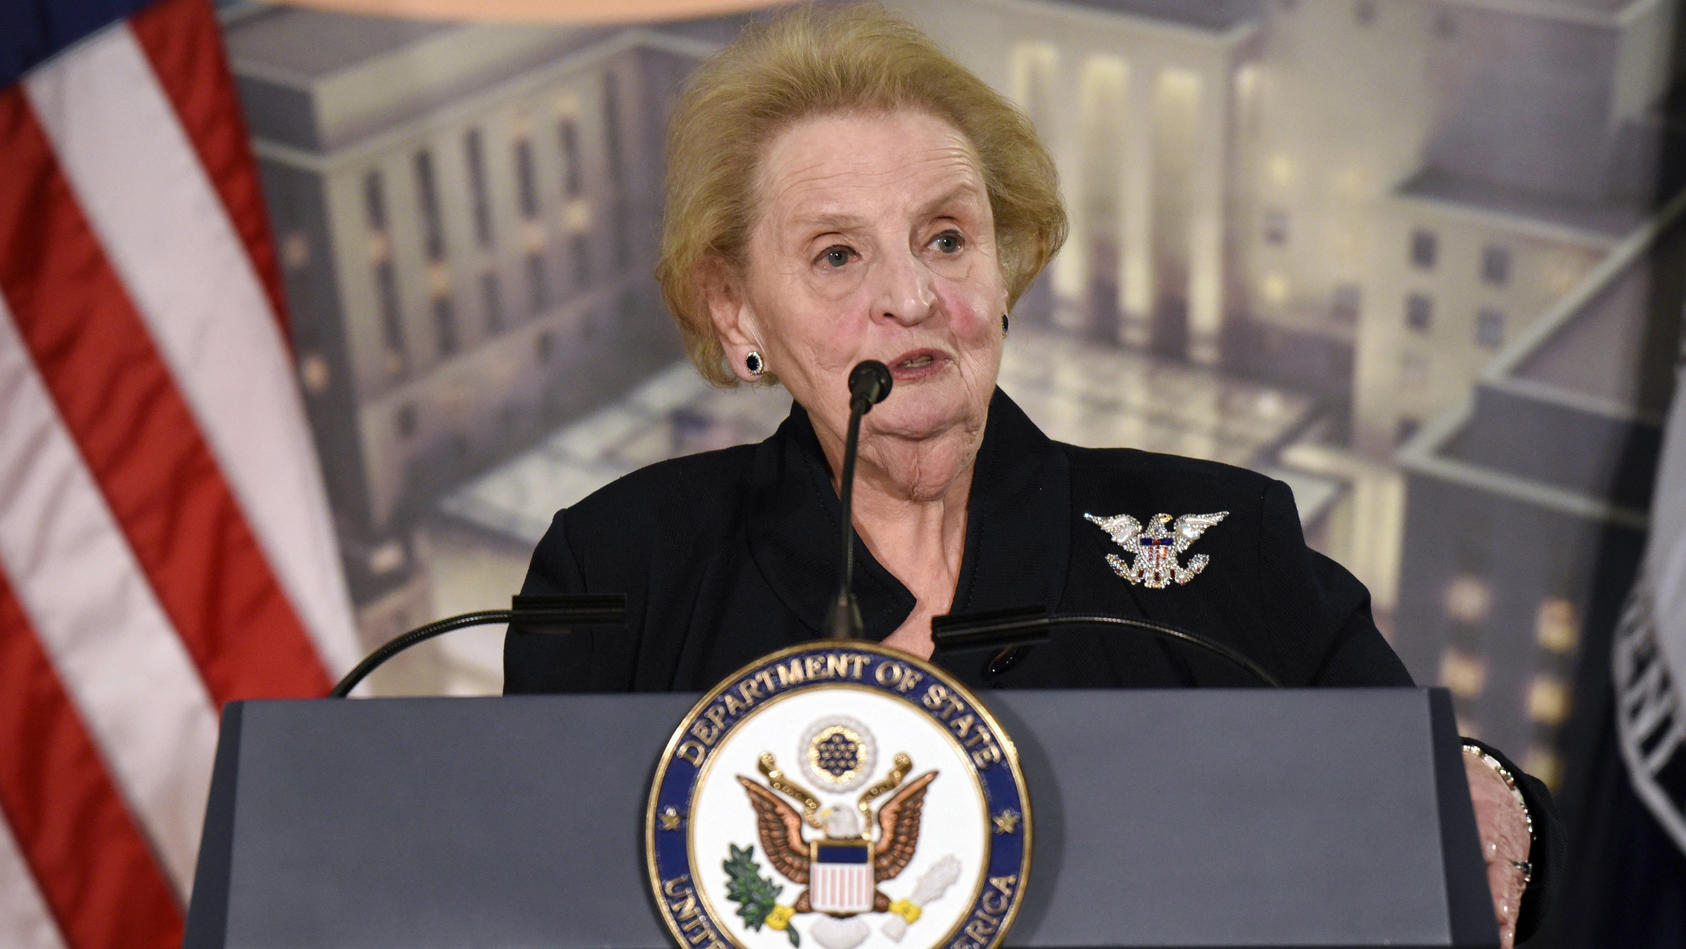 FILE - Former Secretary of State Madeleine Albright speaks at a reception celebrating the completion of the U.S. Diplomacy Center Pavilion at the State Department in Washington, Jan. 10, 2017. Albright has died of cancer, her family said Wednesday, M